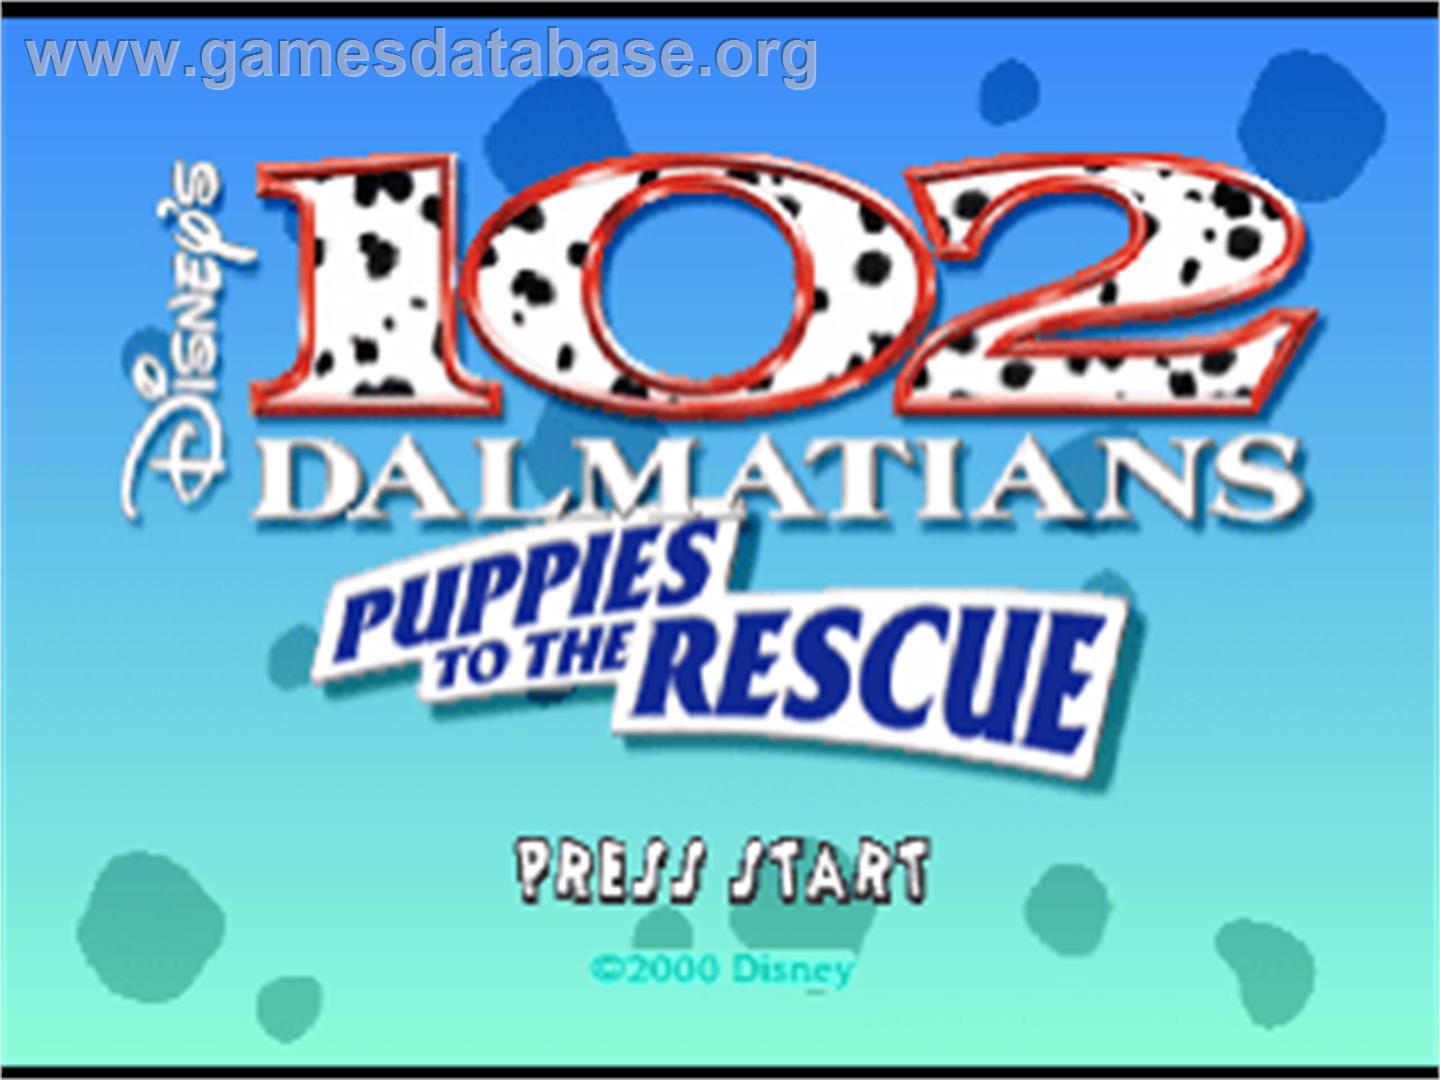 Disney's 102 Dalmatians: Puppies to the Rescue - Sony Playstation - Artwork - Title Screen